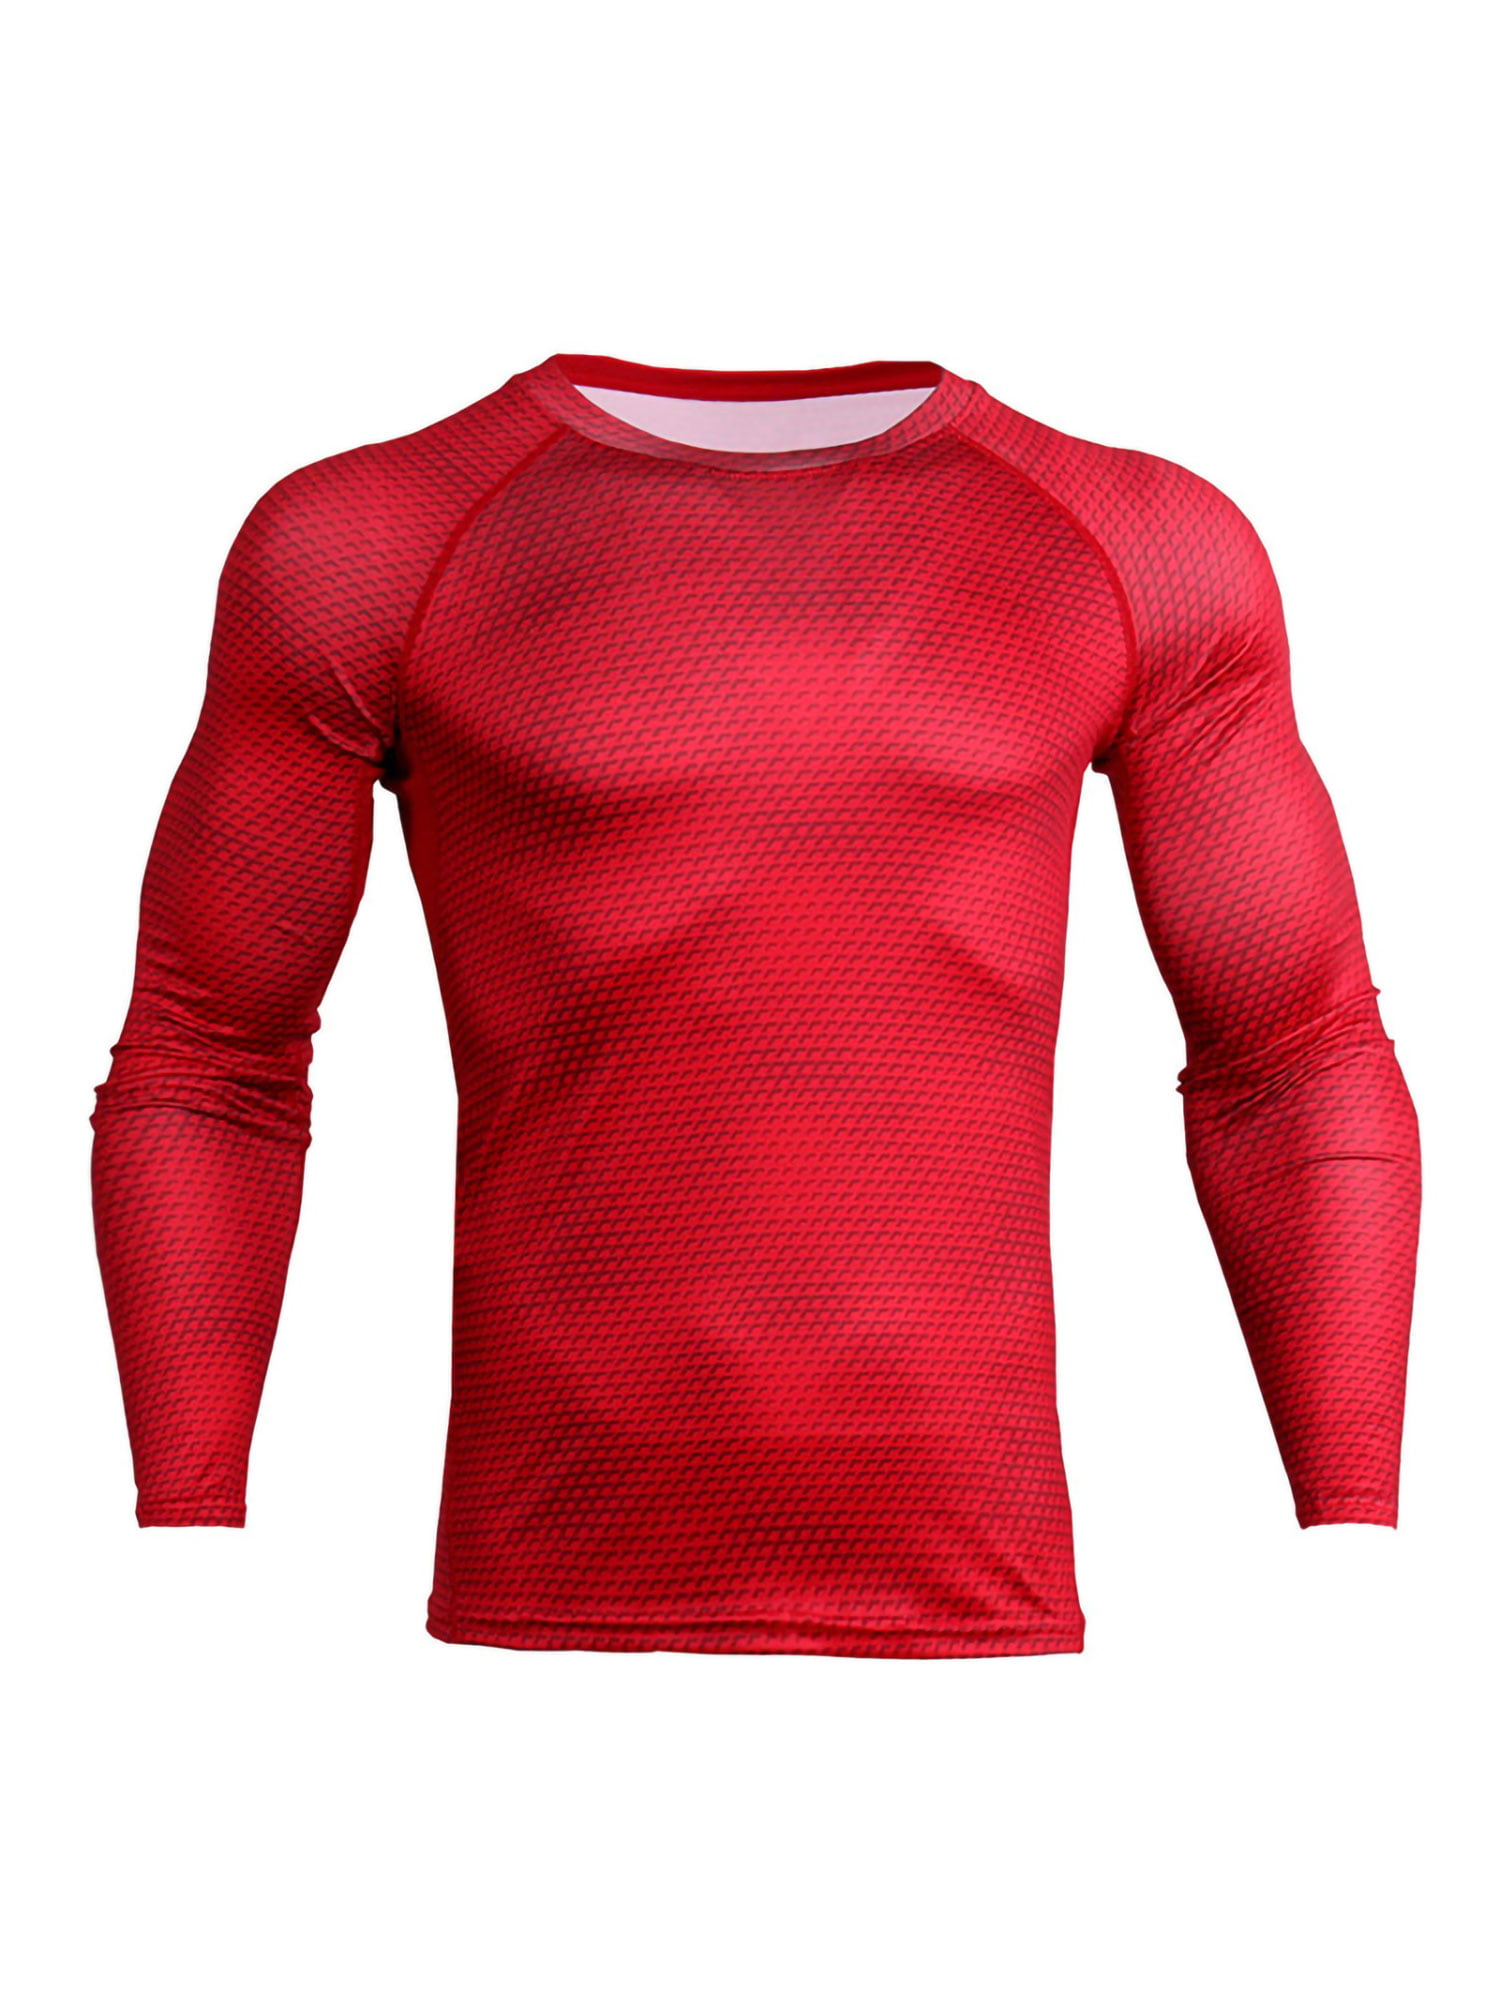 Boys Long Sleeve Shirt Quick Dry Baselayer Compression Trianing Tops 